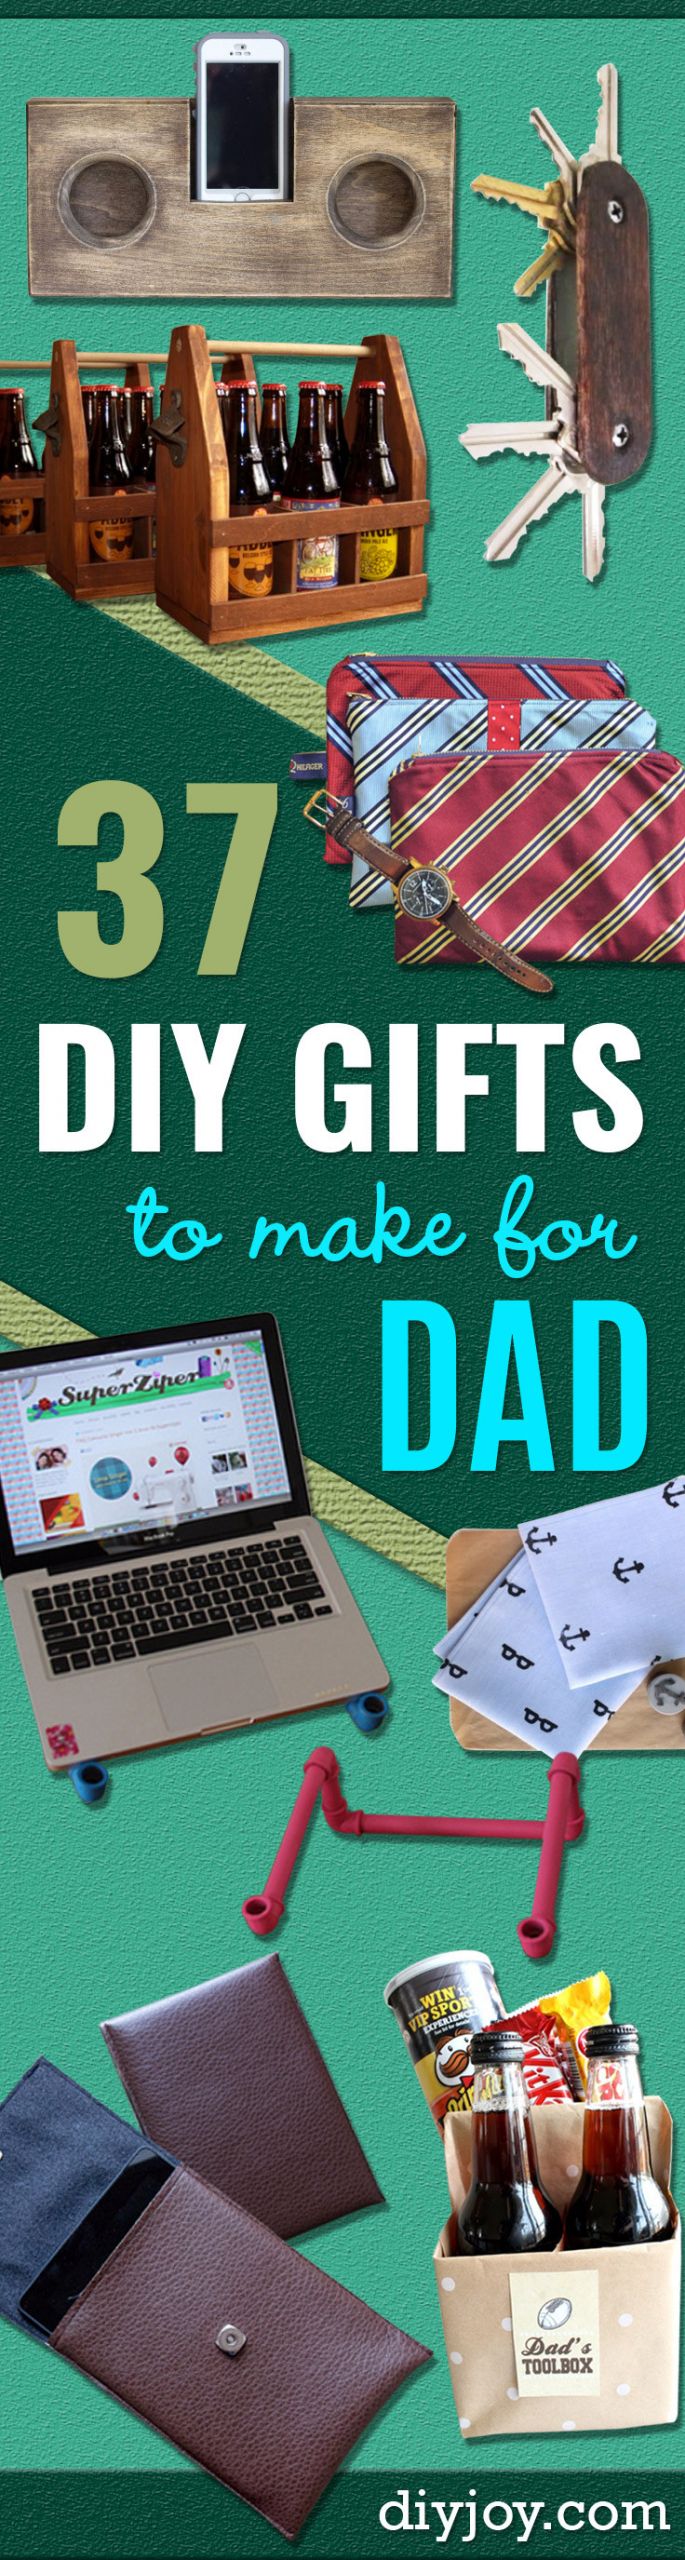 DIY Birthday Gifts For Dad
 37 Awesome DIY Gifts to Make for Dad